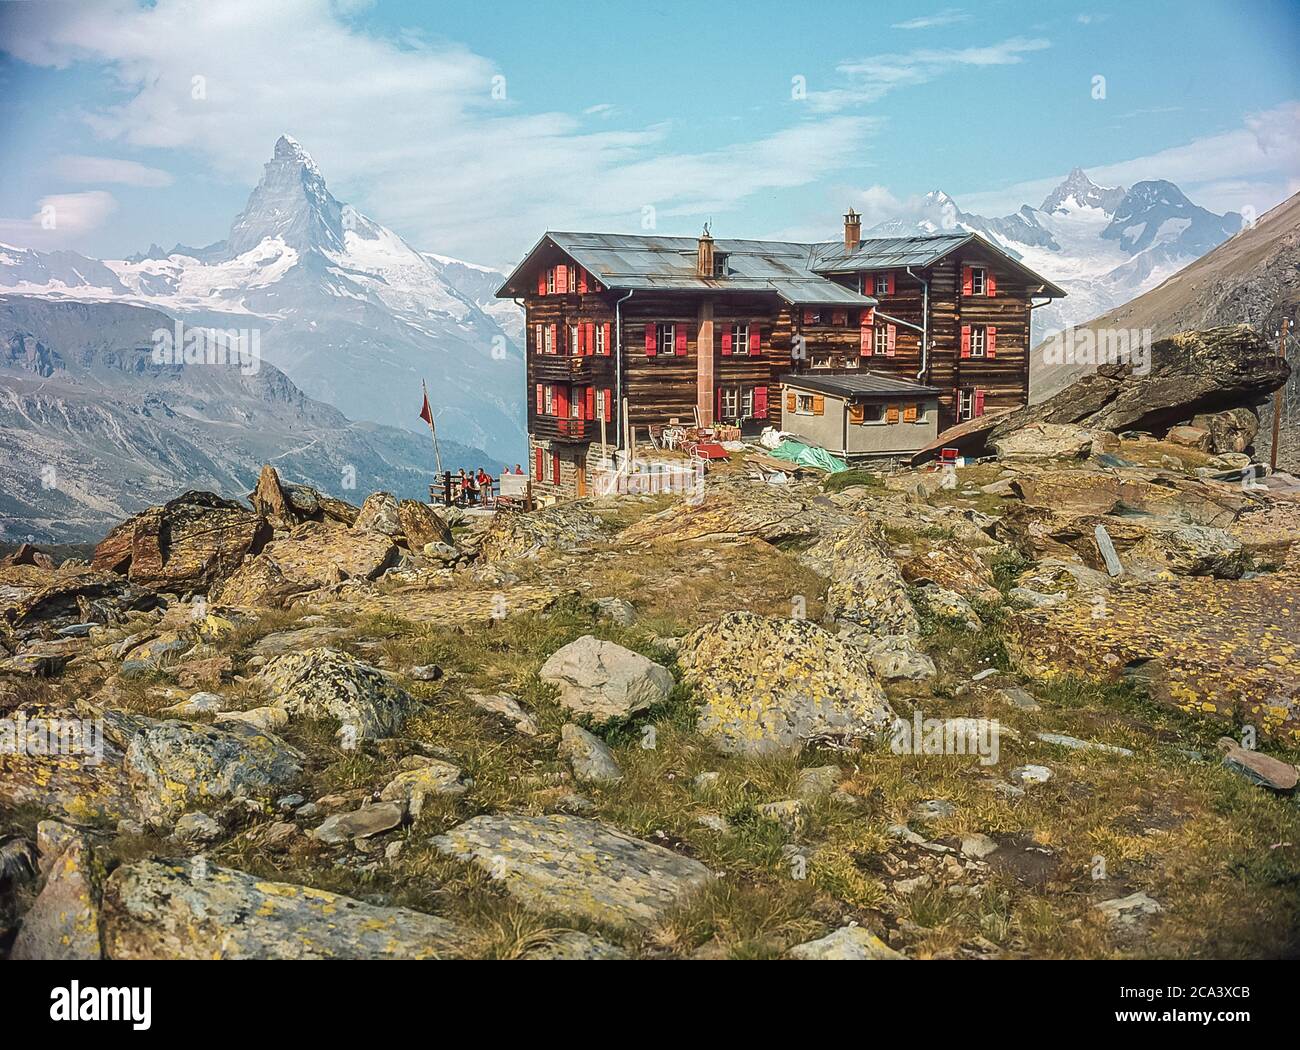 This is the Fluhalp hut mountain refuge looking across the valley to the iconic Matterhorn mountain, with the Obergabelhorn to the right, all  situated above the Swiss mountain holiday resort town of Zermatt in the Swiss Canton of Valais Stock Photo